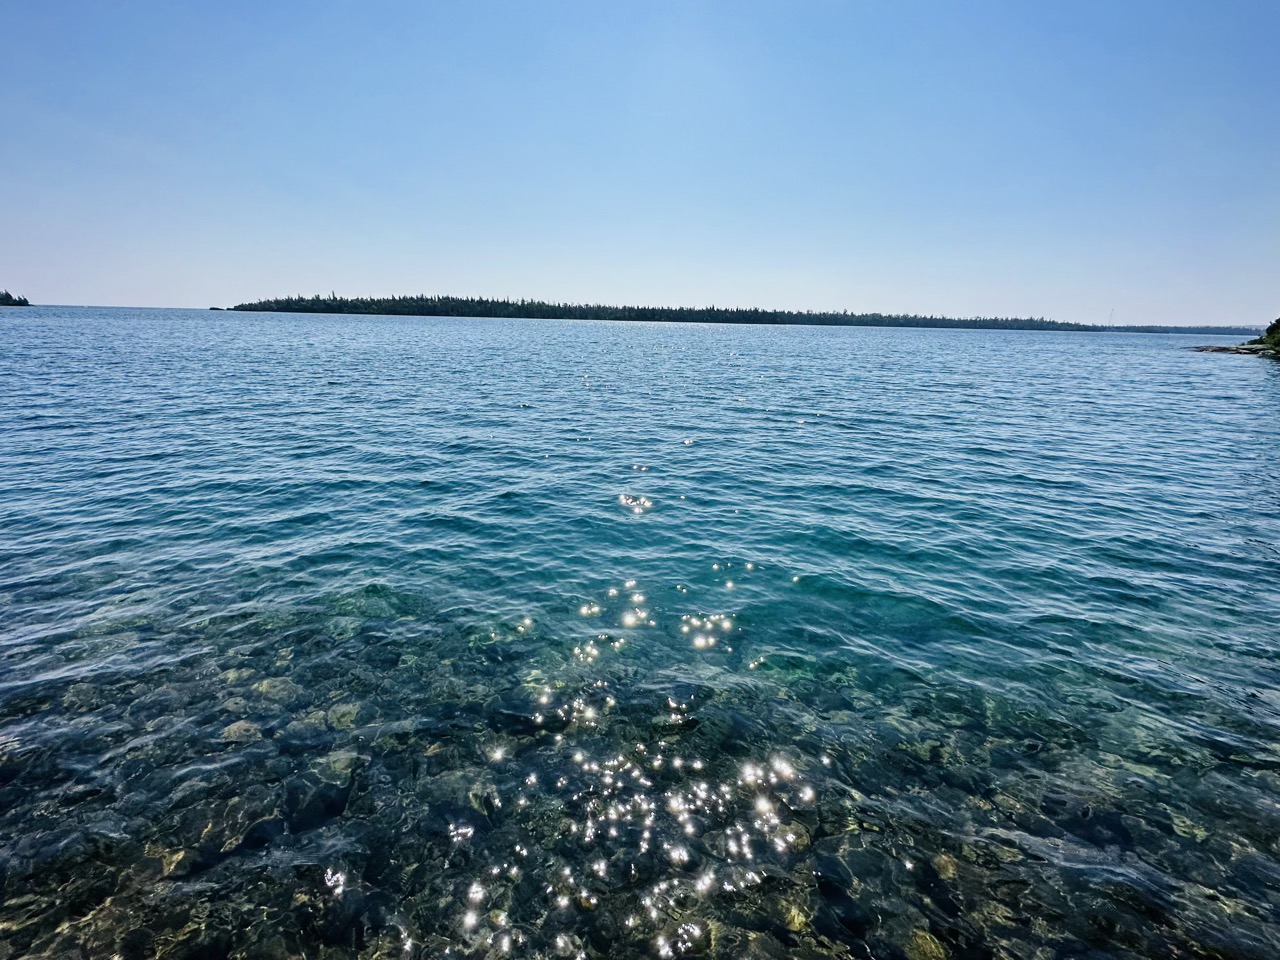 Looking southeast toward the outer islands and Lake Superior